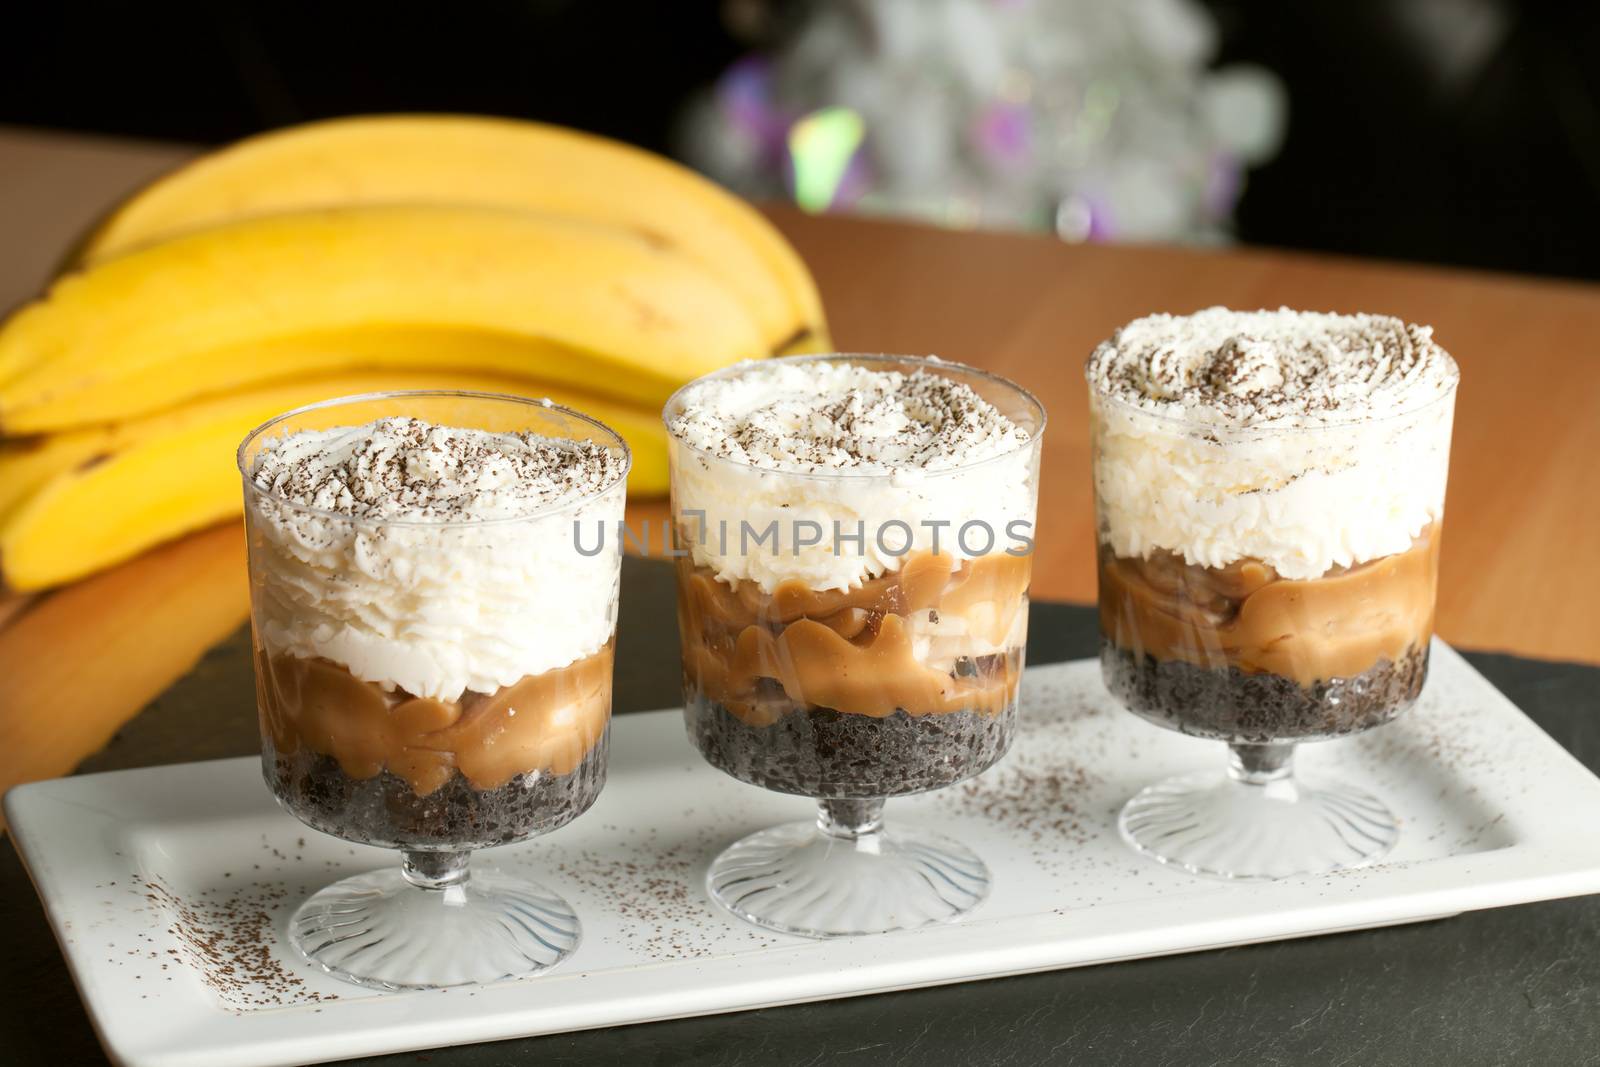 Banana caramel parfait desserts with fresh whipped cream and chocolate cookie crumbles.